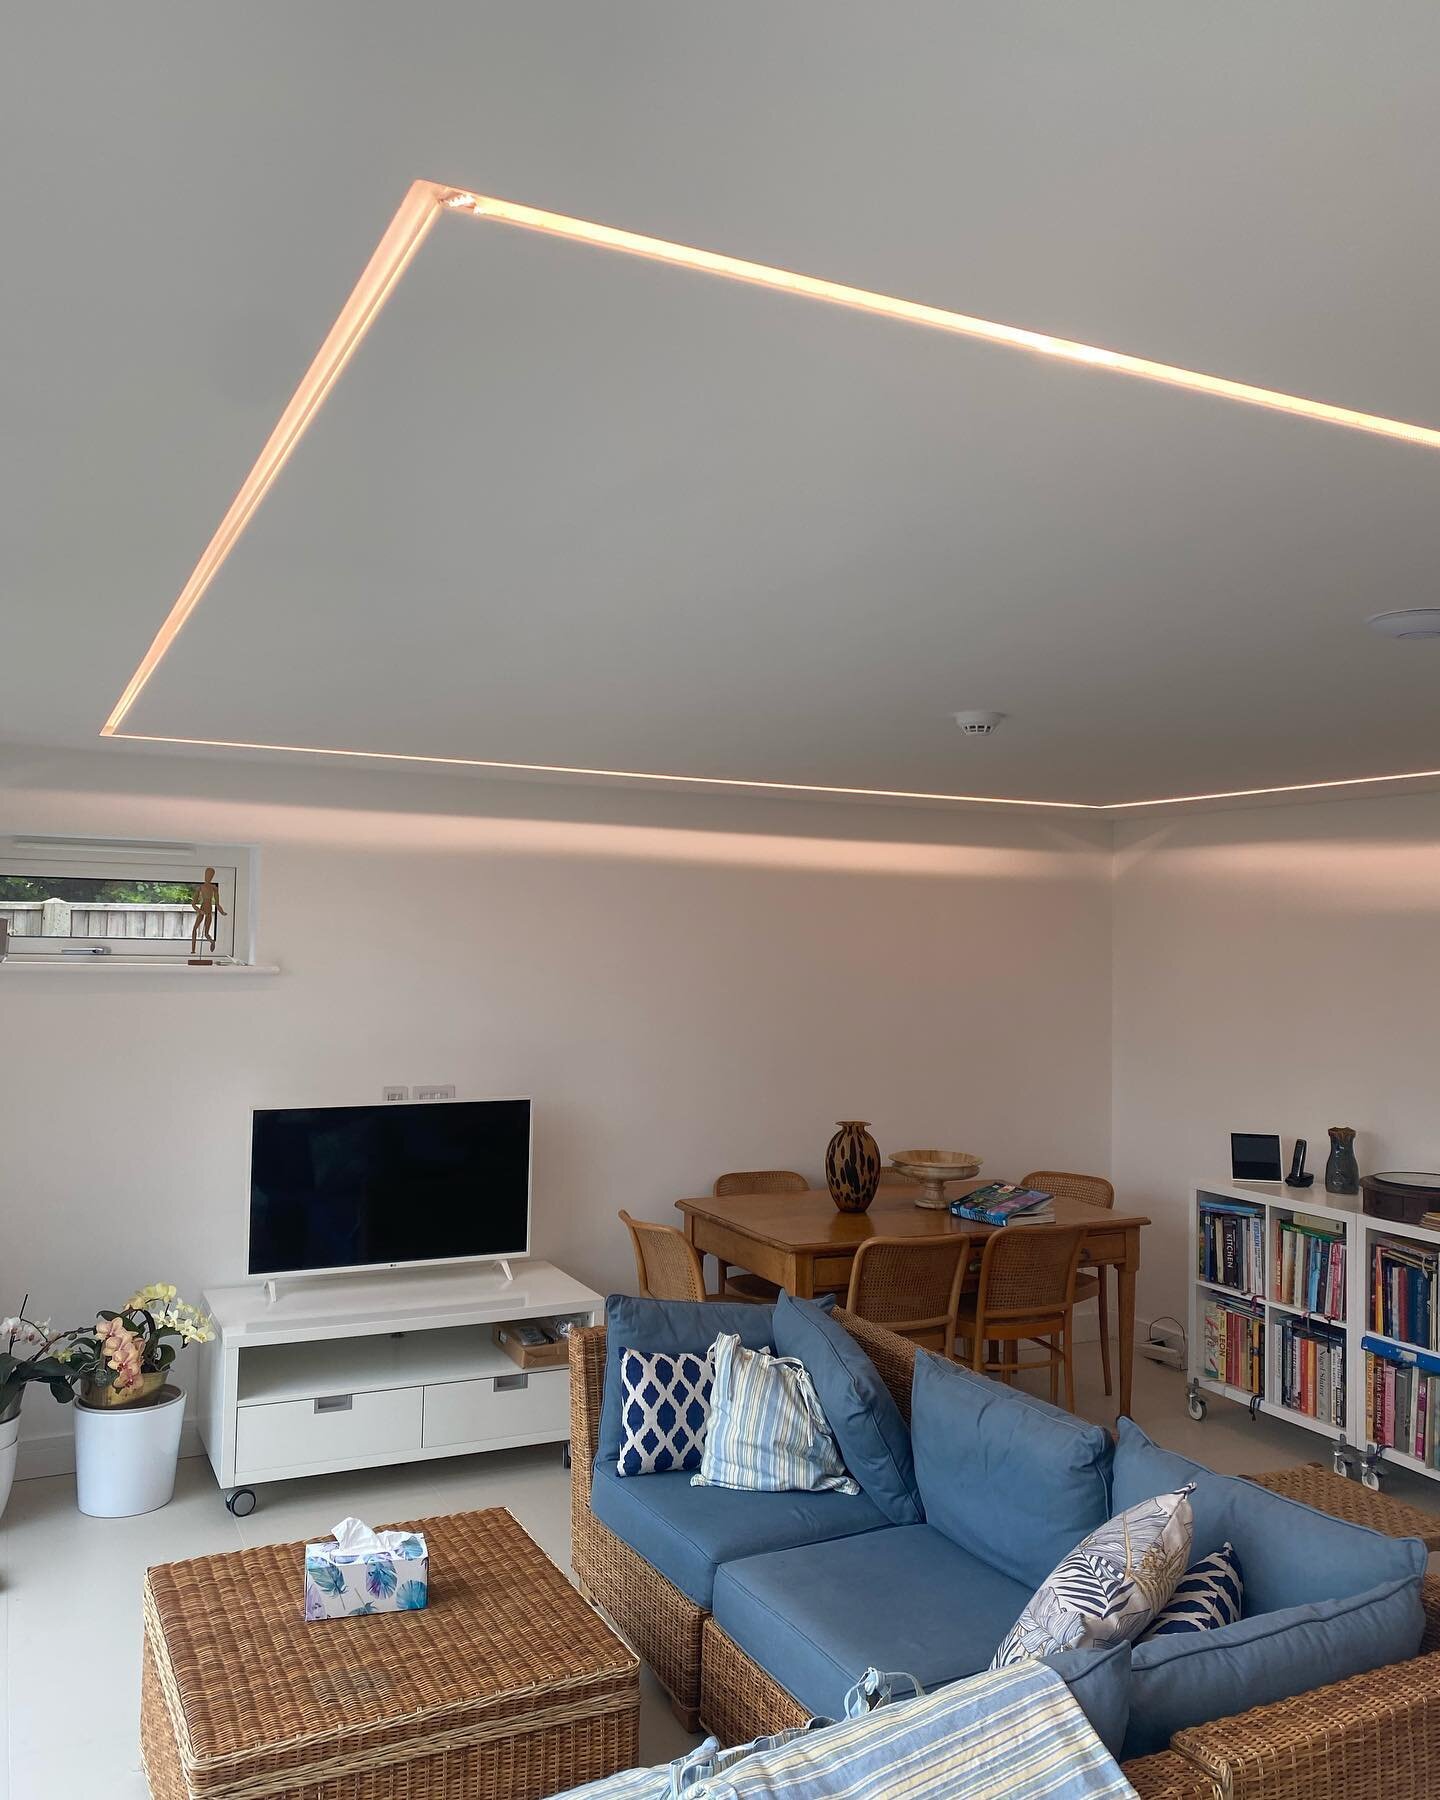 LED Linear lighting is becoming more popular for that seemless ceiling finish.  Our profiles plaster in and direct the light perfectly. #lighting #smarthome #smarthomes #control4_smart_home  #canfordcliffs  #sandbanks #lillput #neeforestnationalpark